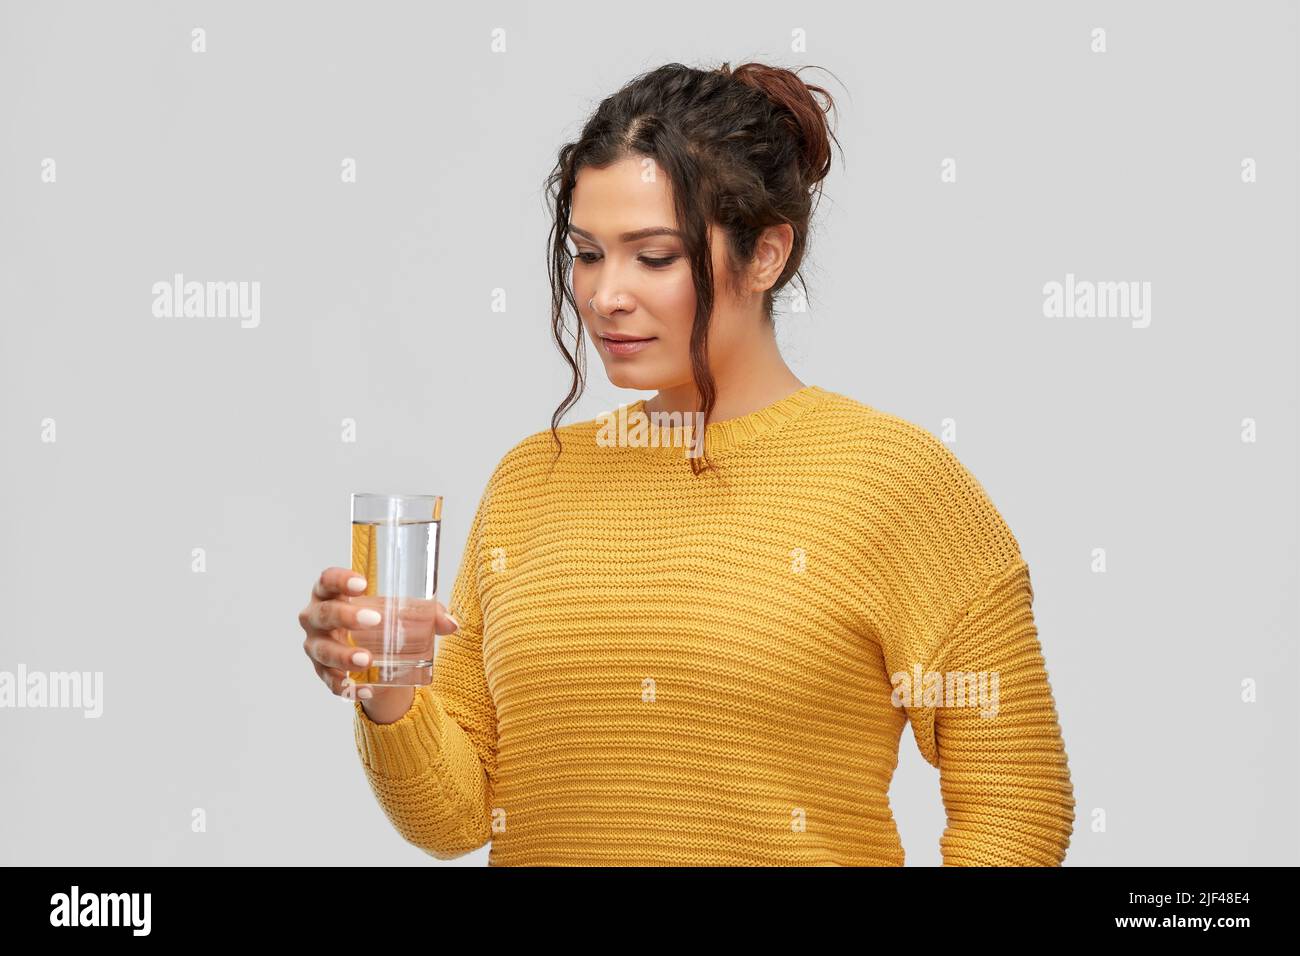 smiling young woman with water in glass Stock Photo